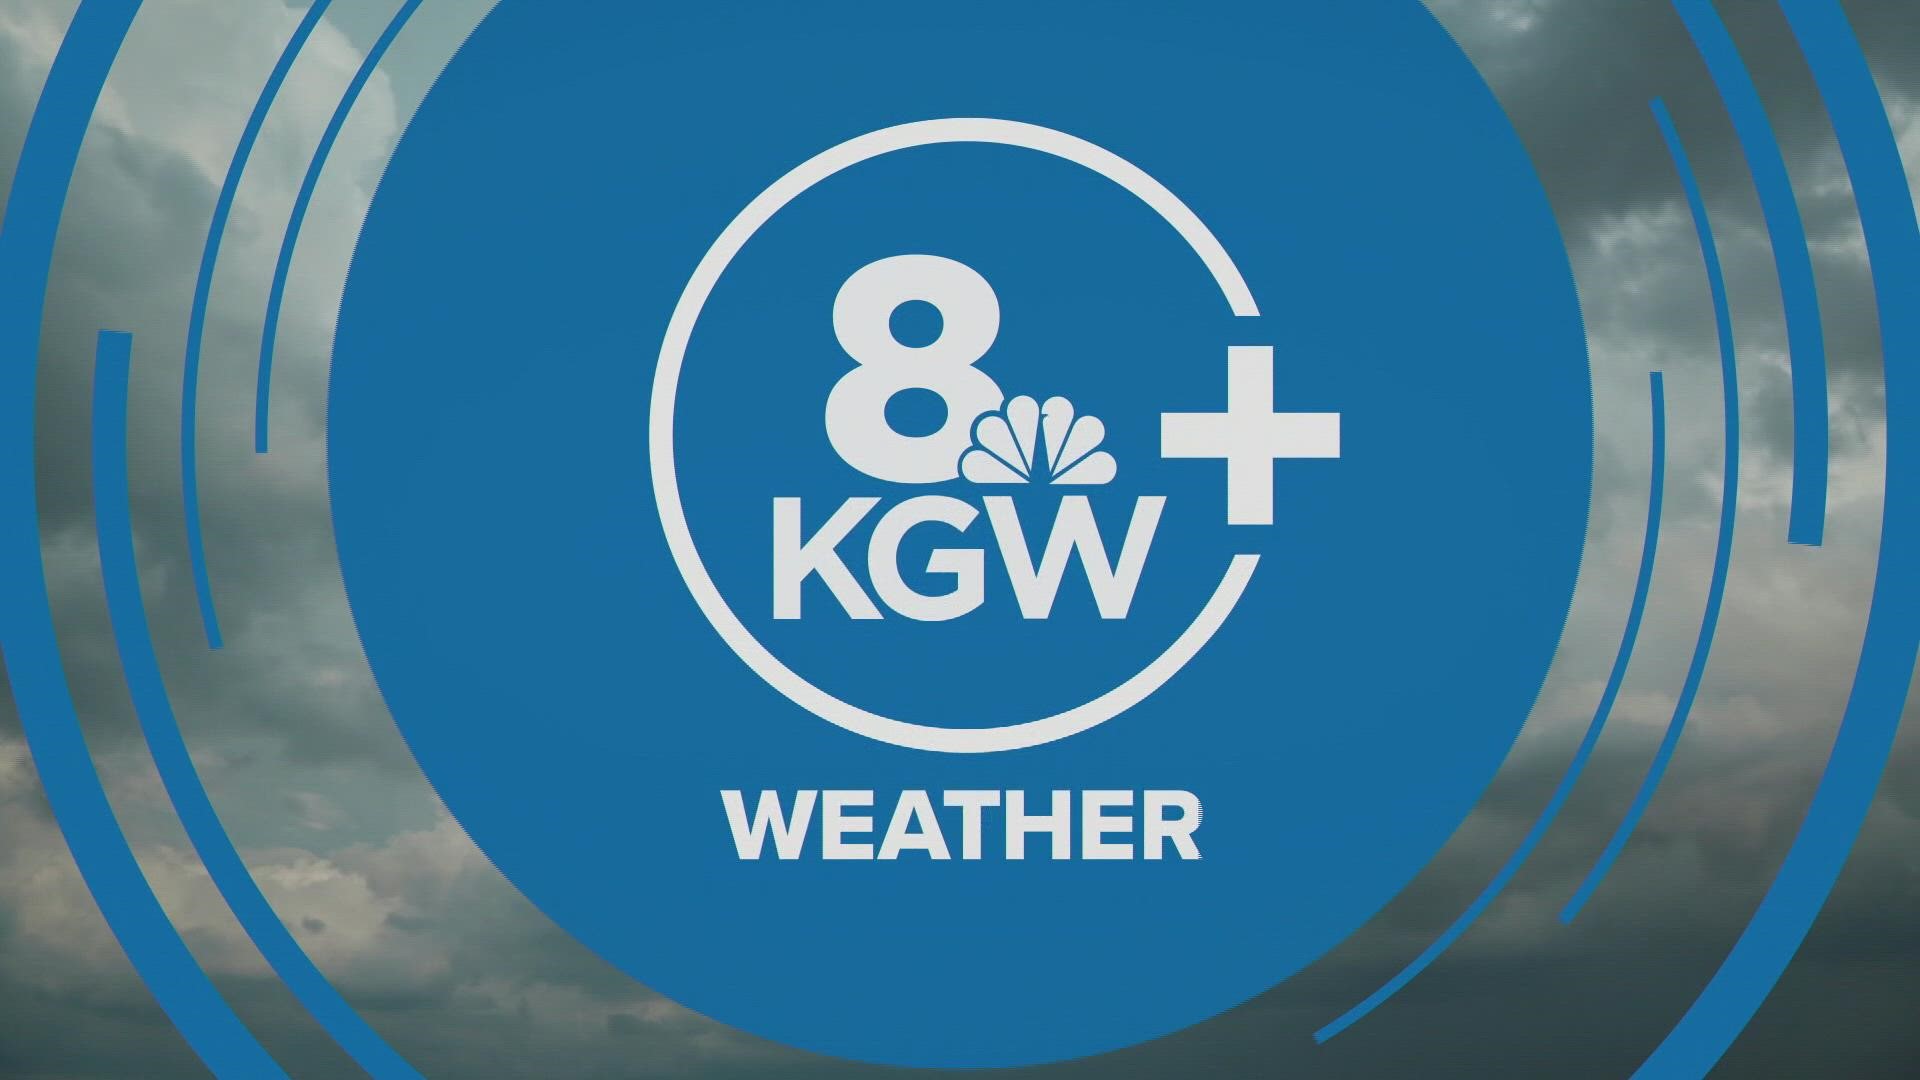 KGW meteorologist Rod Hill has the latest forecast for the Portland metro and surrounding areas for Thursday, Aug. 11, 2022.